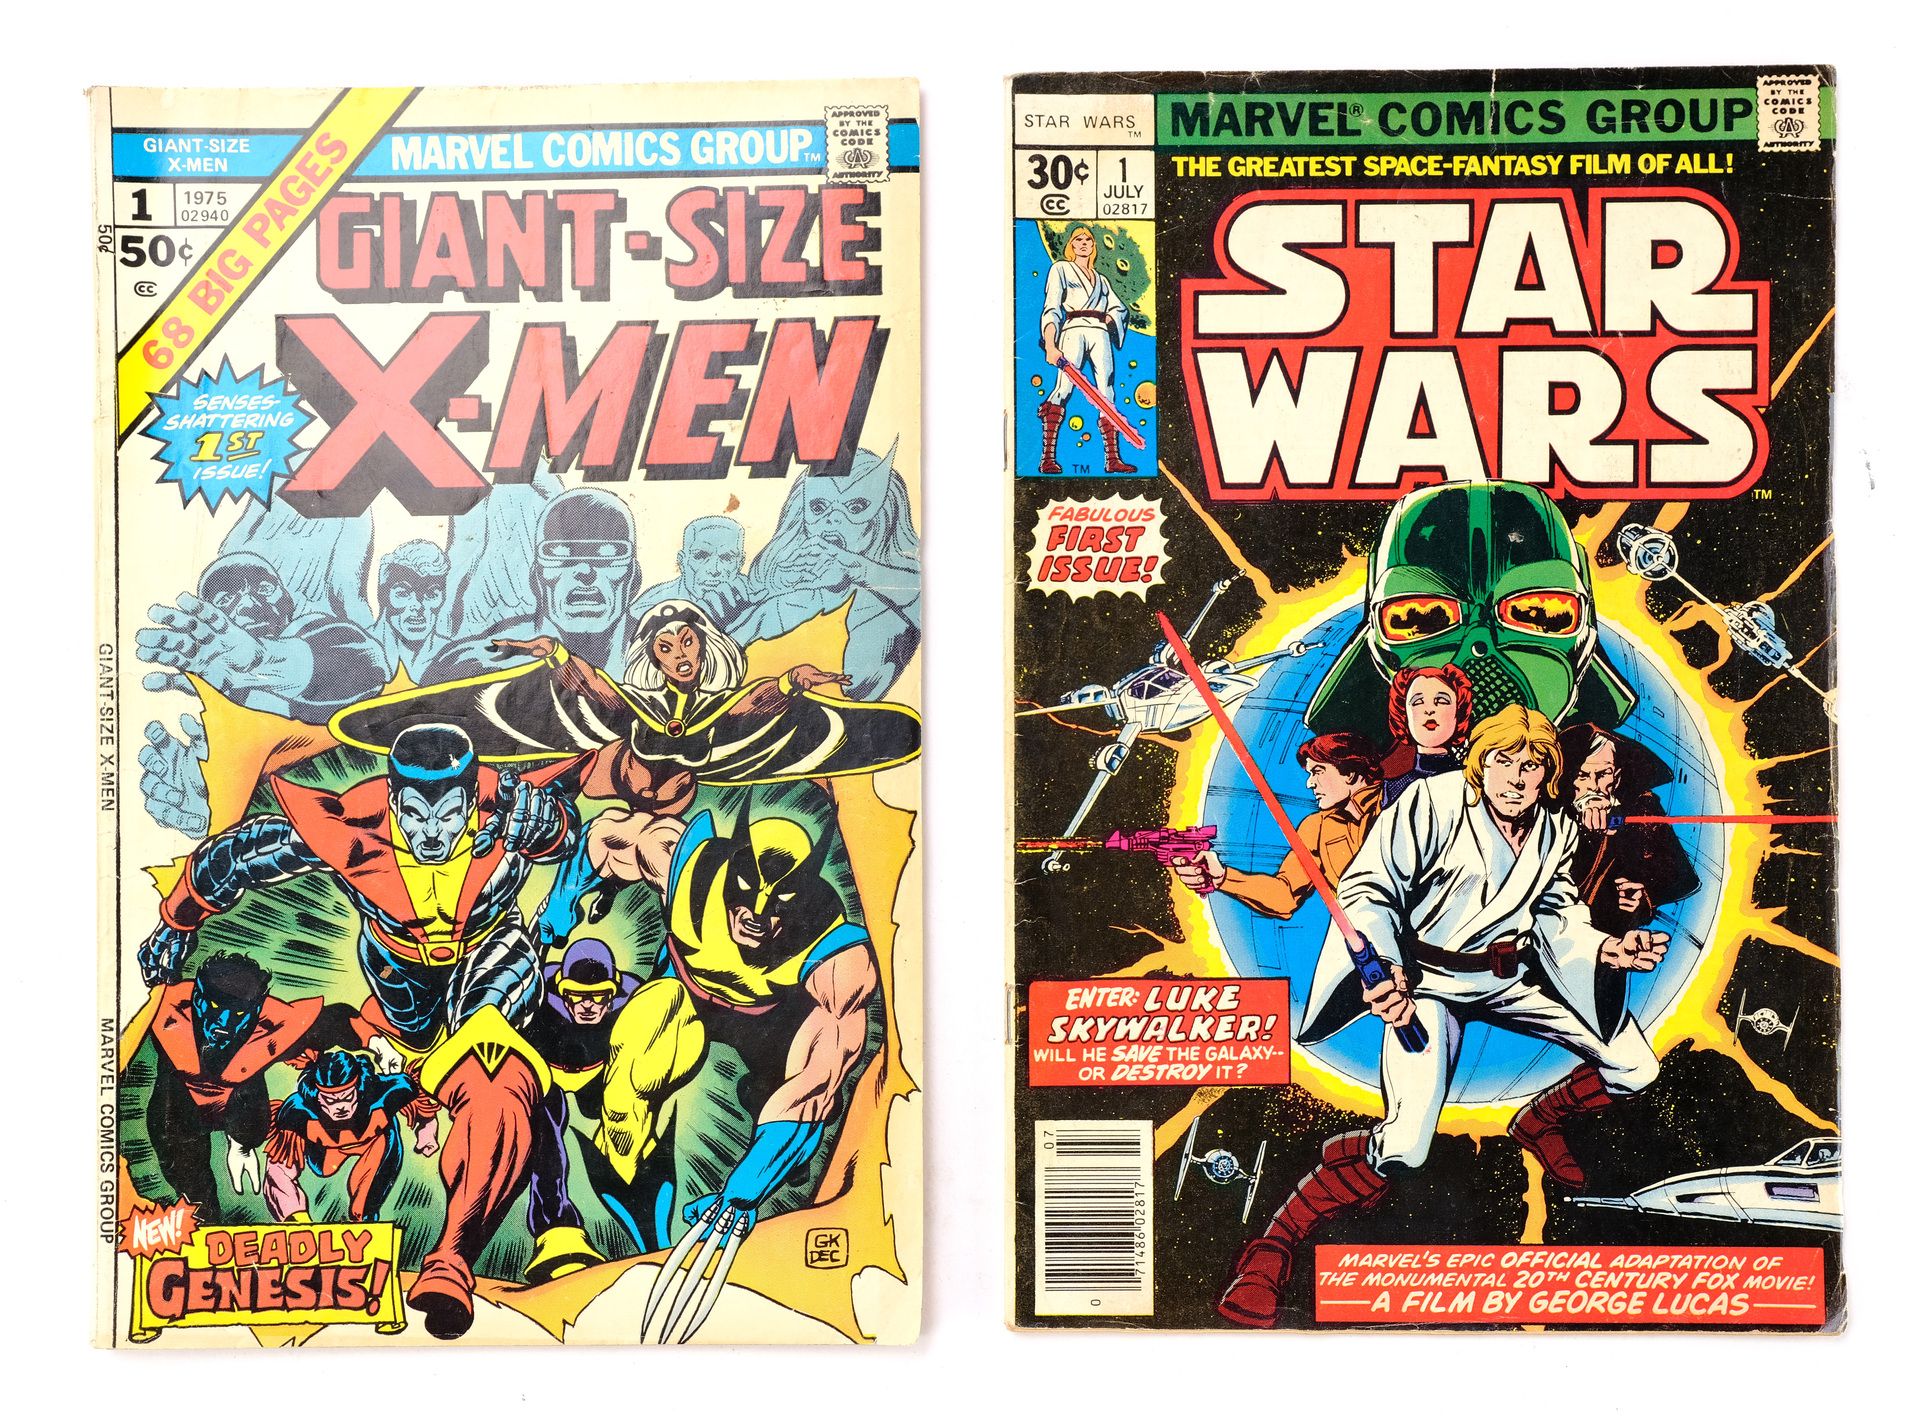 MARVEL COMICS - Giant-Size X-Men No. 1 and Star Wars No. 1 with 17 First Bronze Age Comic Books [Qty - Image 2 of 5